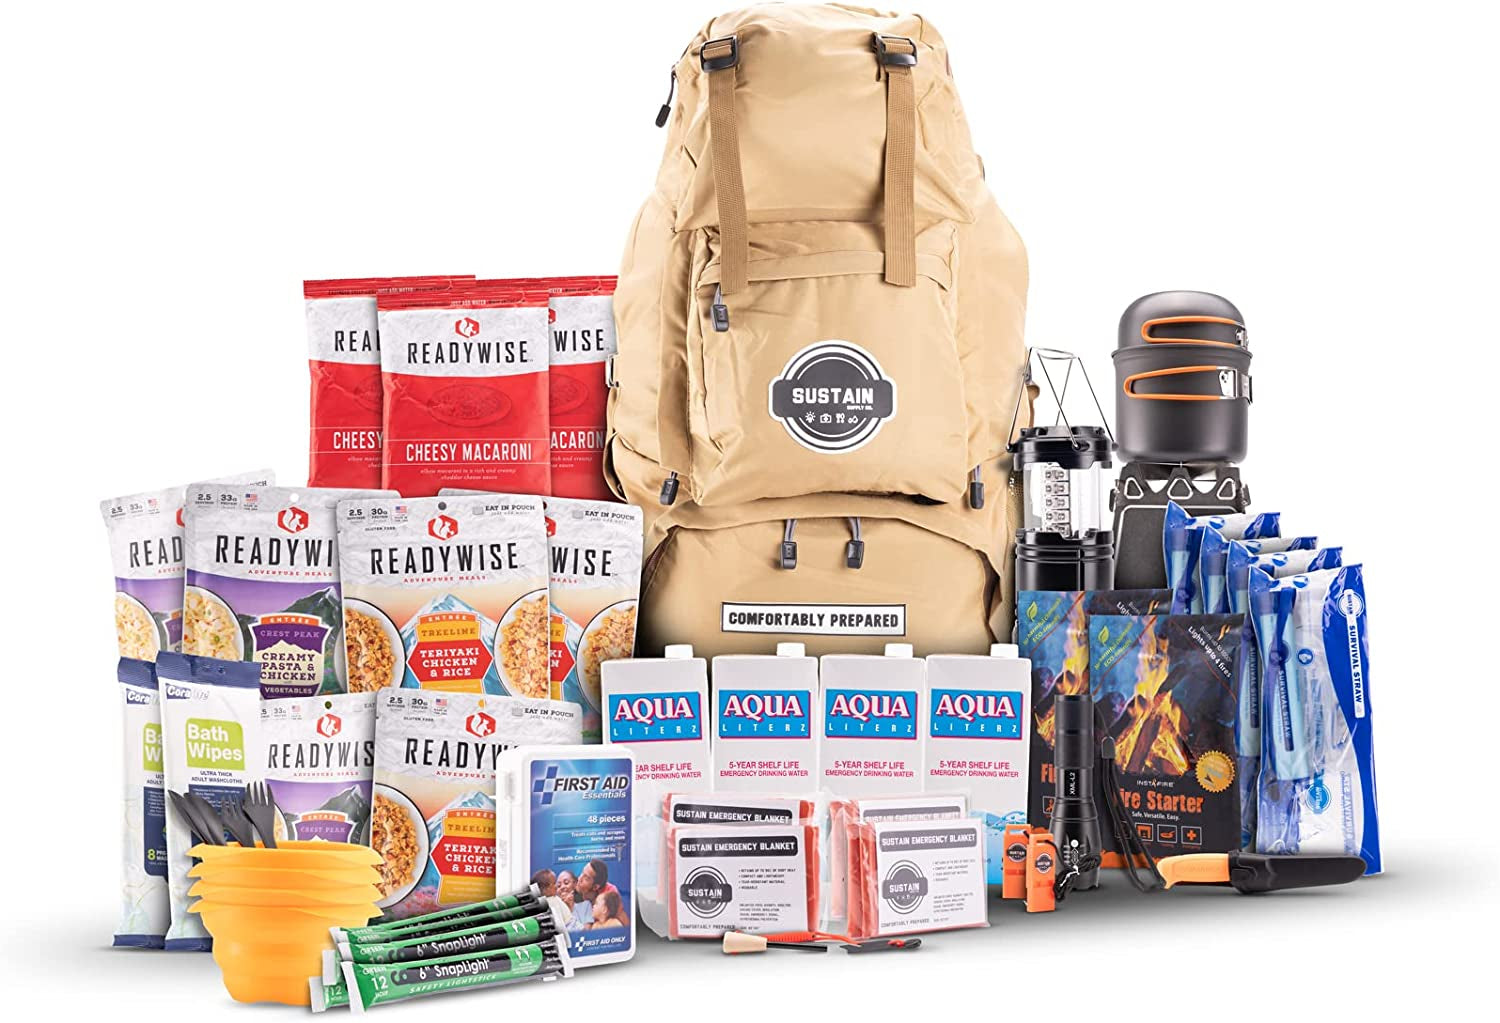 Ultimate 2-4 Person Emergency Survival Kit: Be Prepared for Any Disaster with our All-Inclusive Go-Bag, Packed with Essential Supplies for 72 Hours of Safety and Comfort!